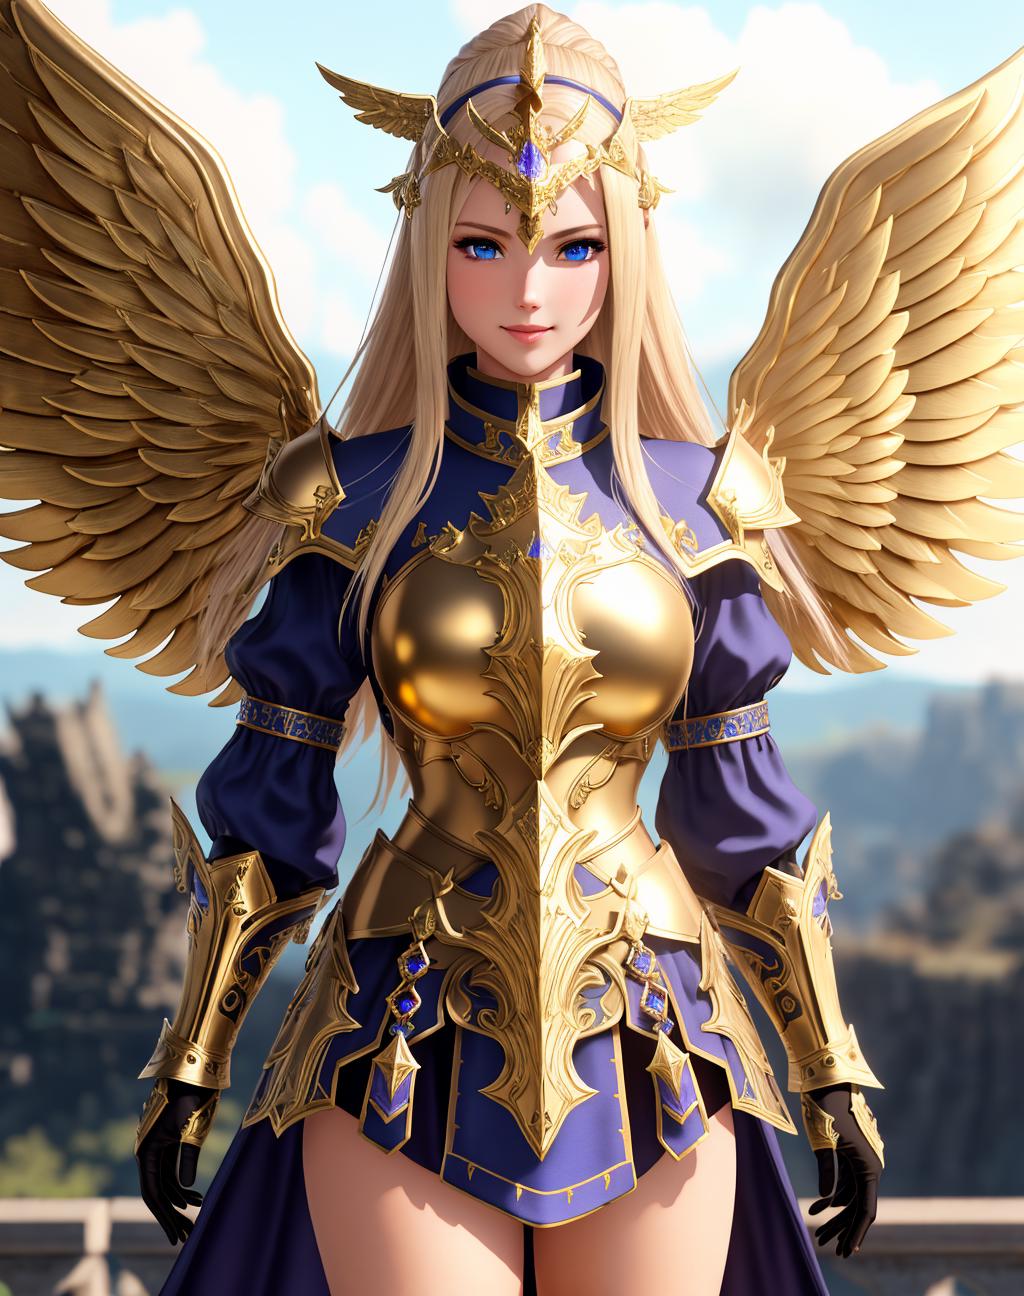 Valkyries image by EDG